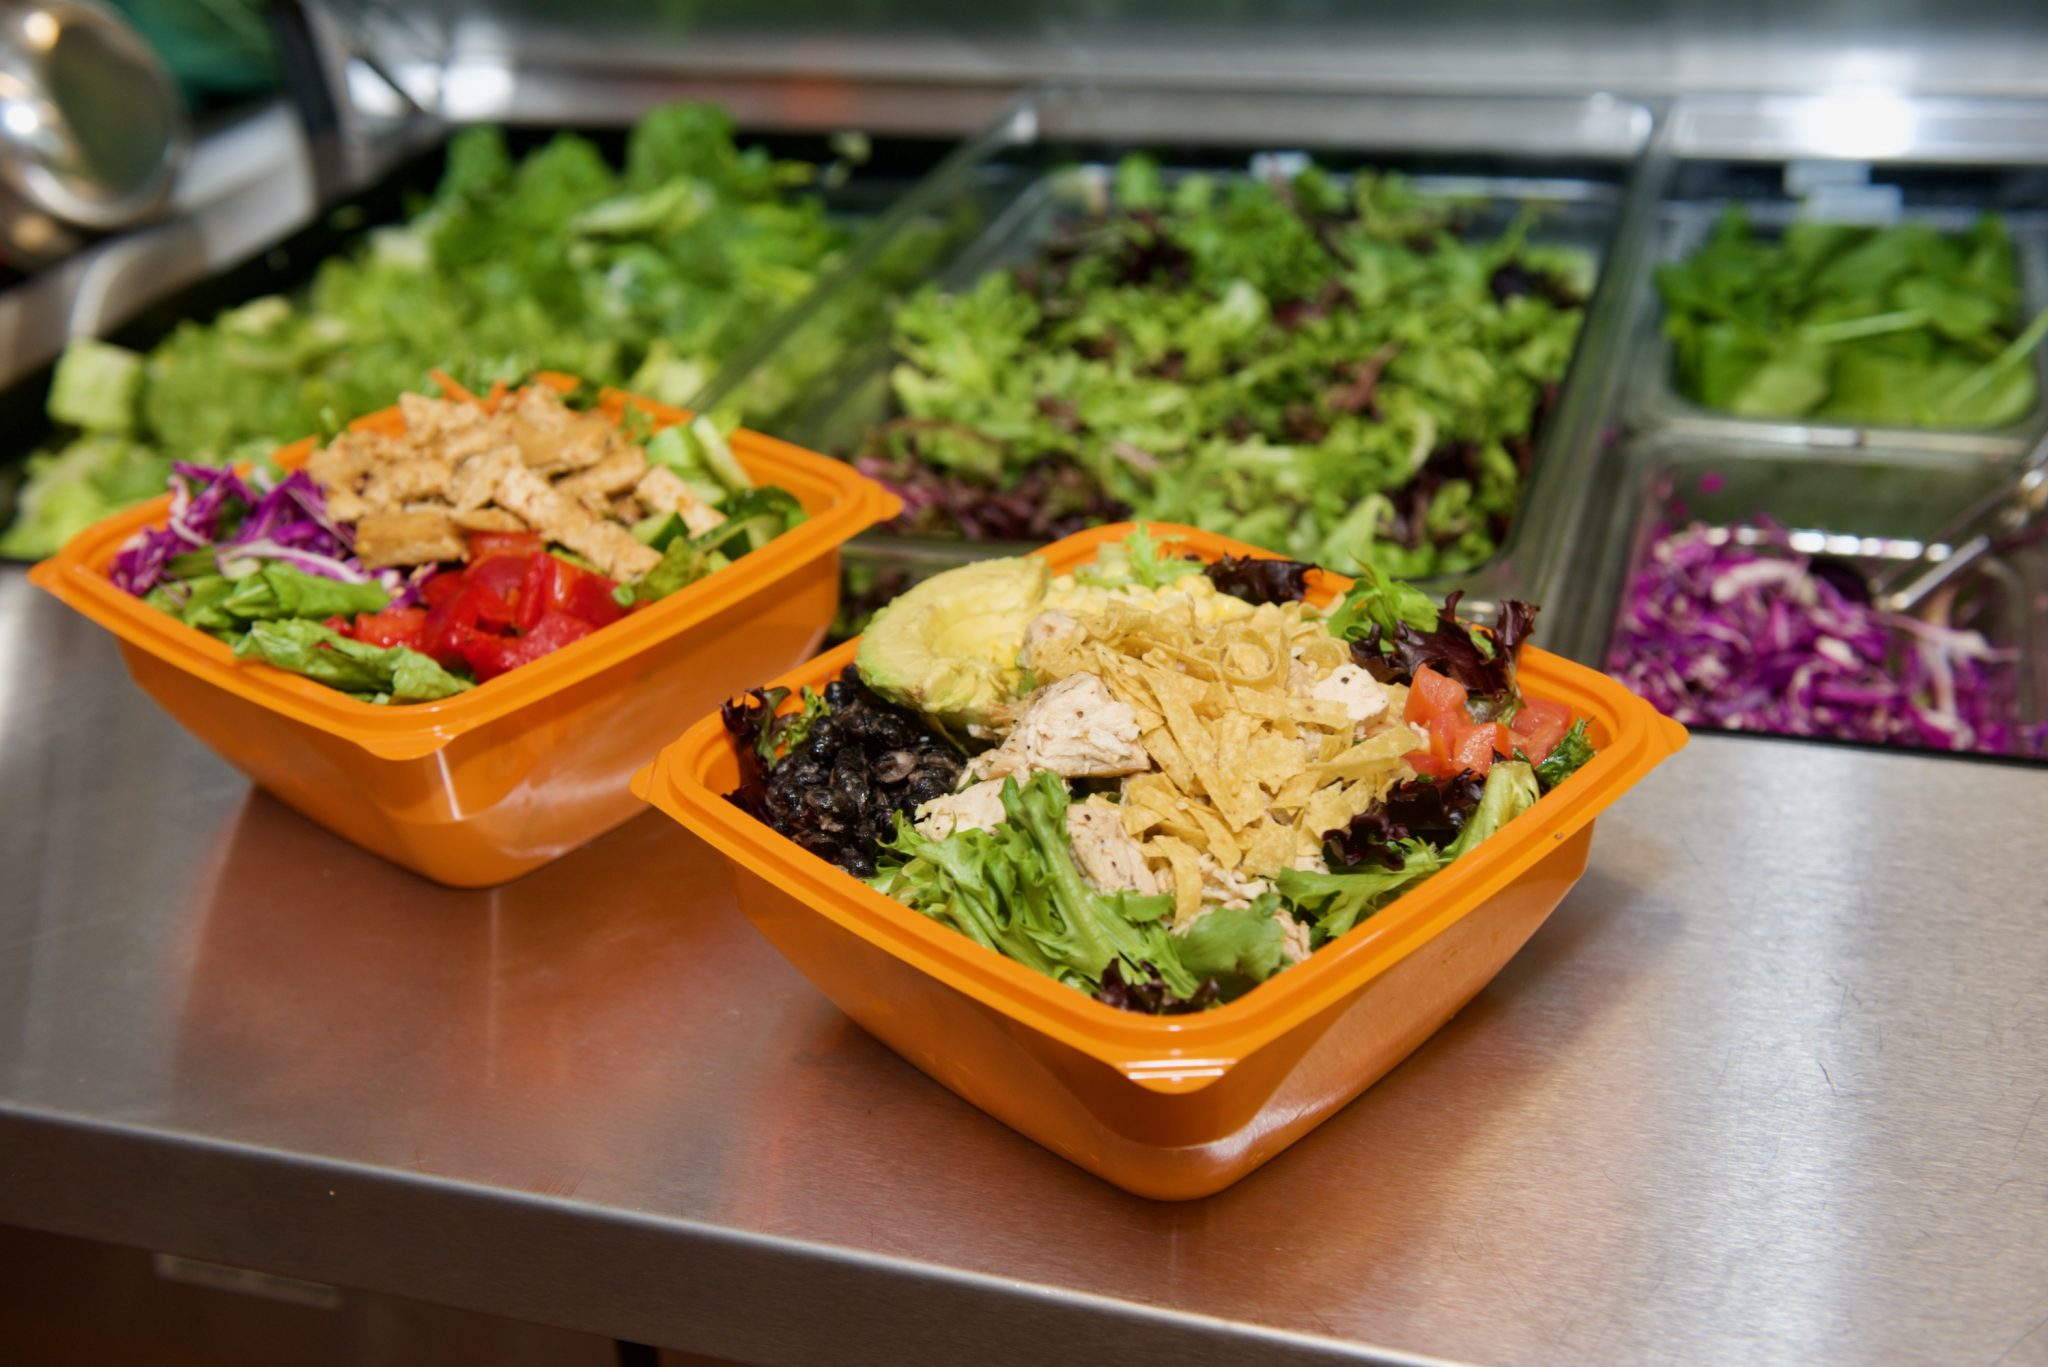 Salad and Go Brings Healthy Food to Plano with Drive-Thru Speed